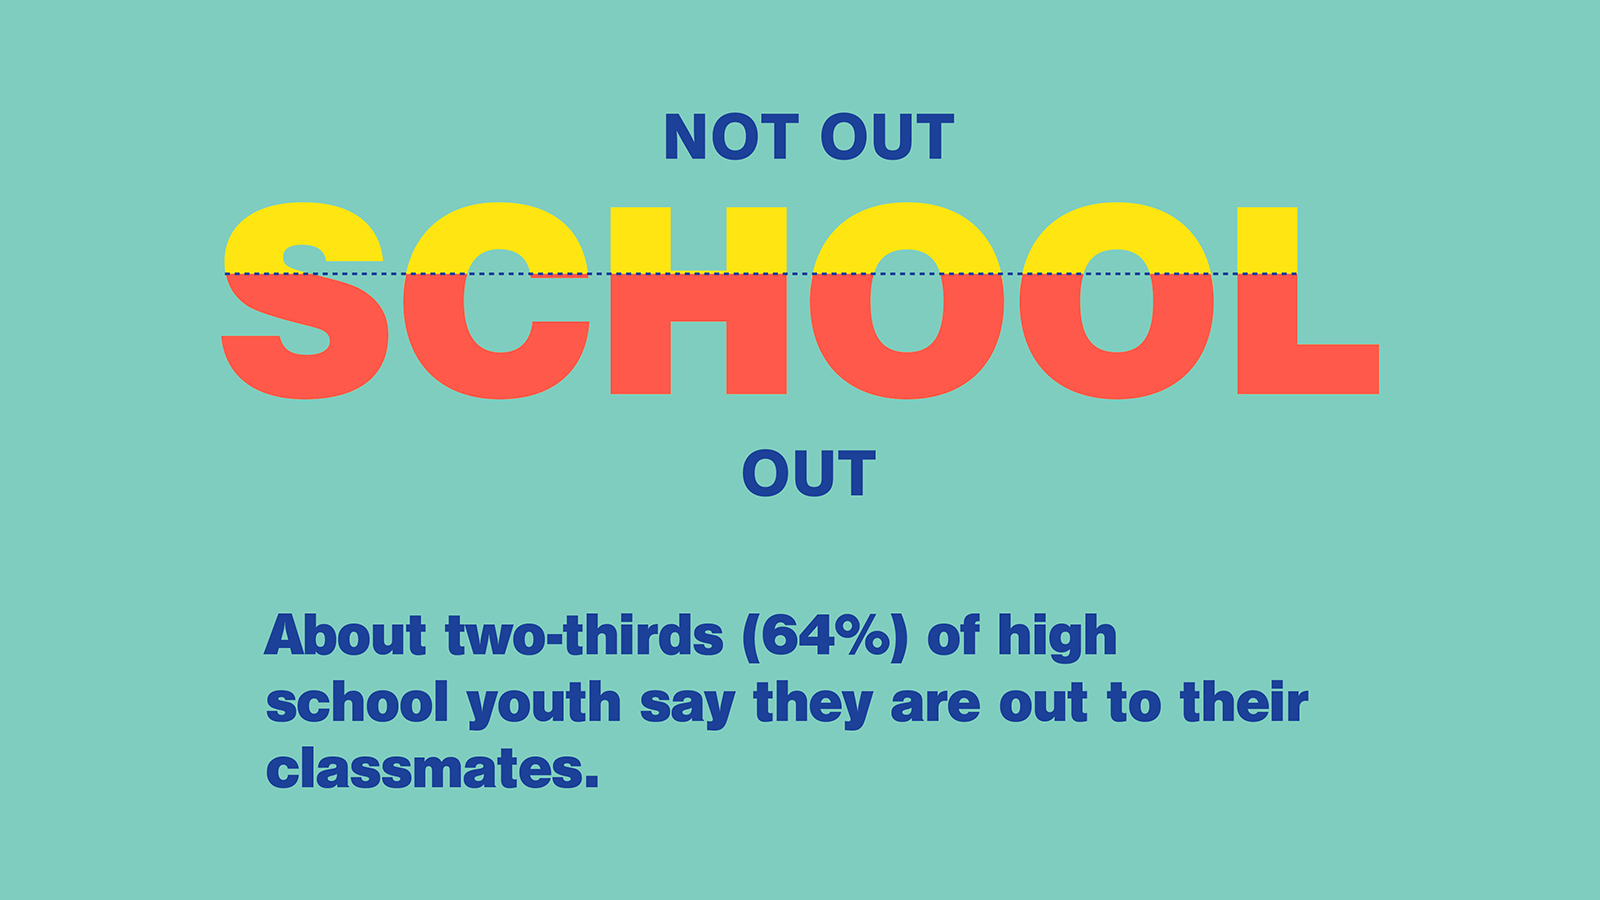 HRC Youth Report; Growing Up LGBT in America